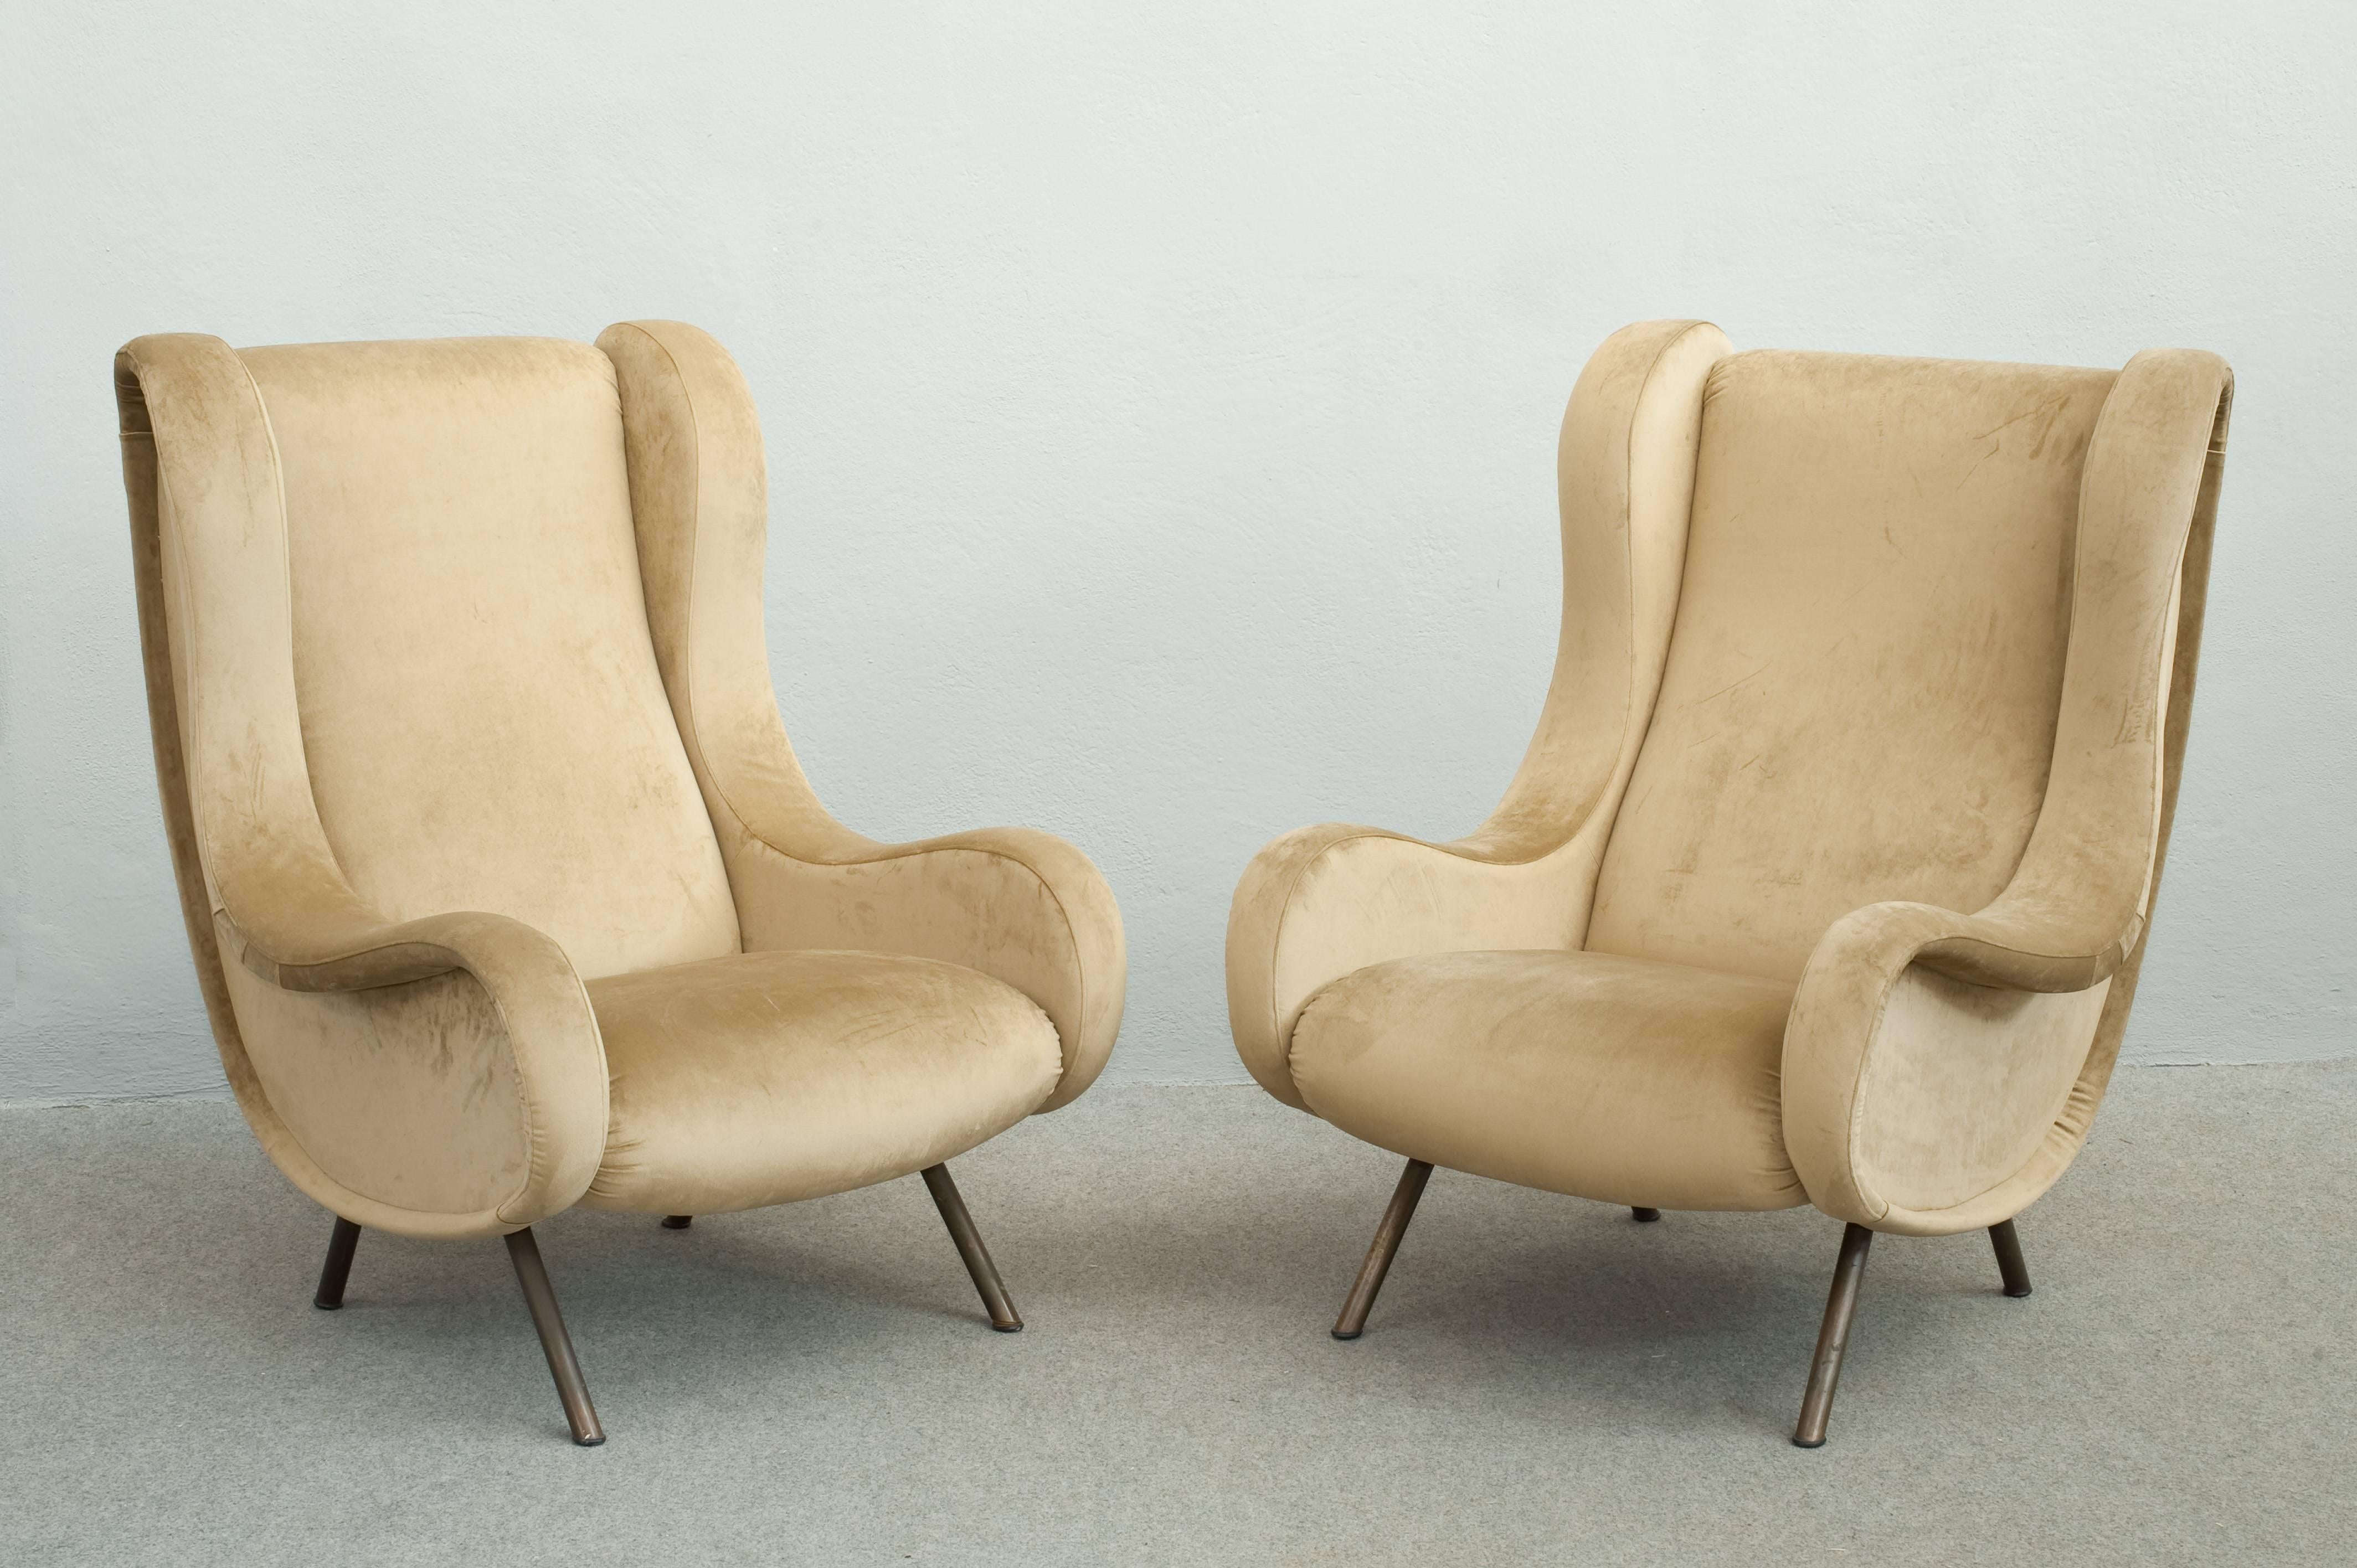 Early pair of Senior chairs designed by Marco Zanuso for Arflex.
Newly reupholstered in velvet.